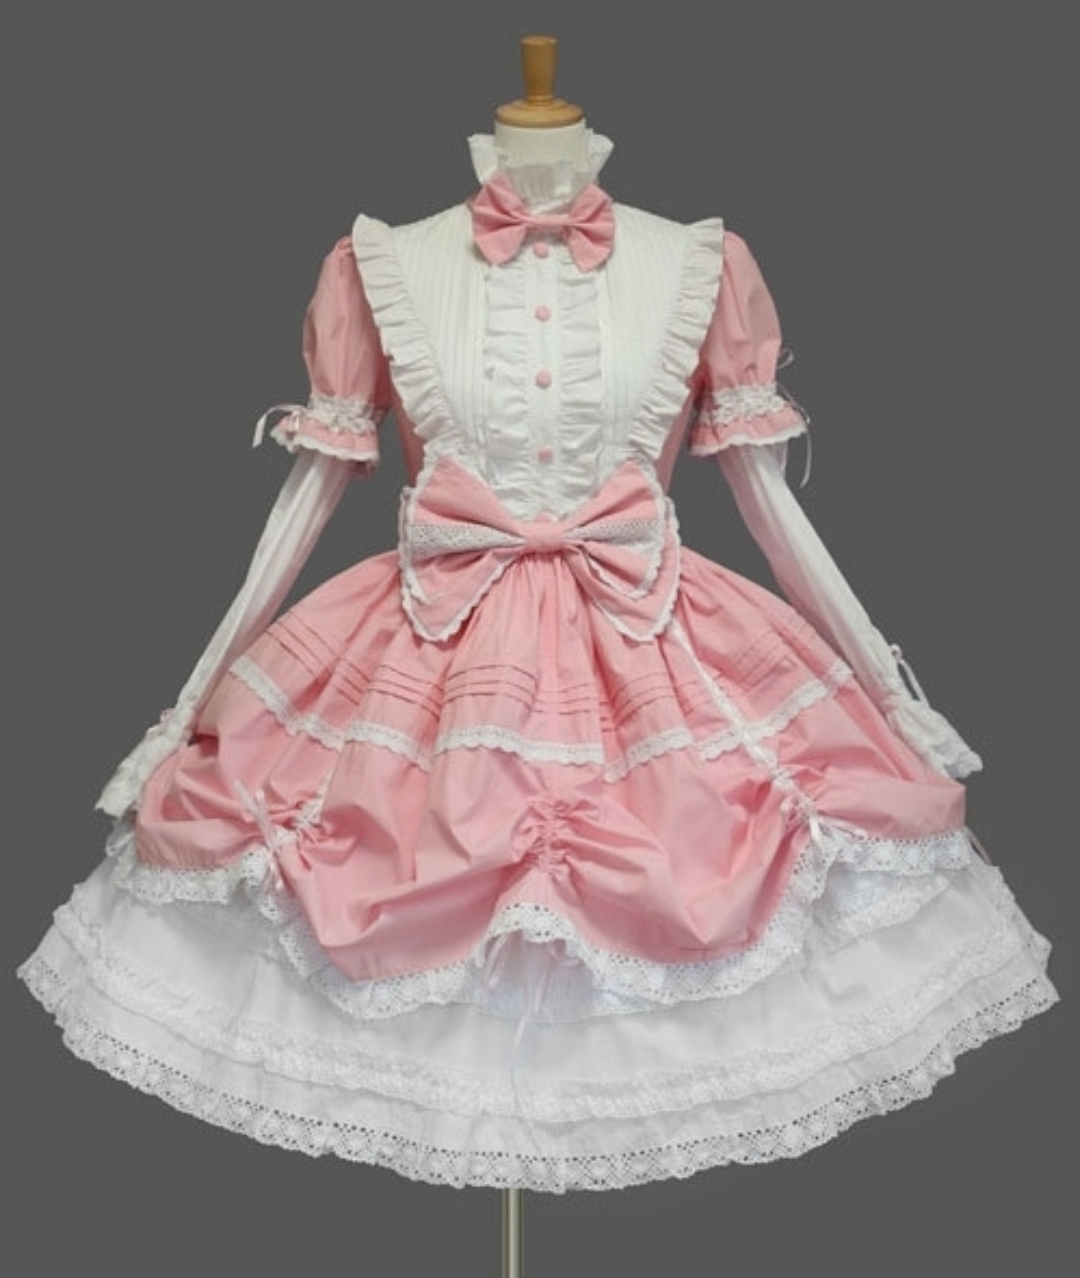 Pink and white dress with white ruffle and a large pink bow on the front